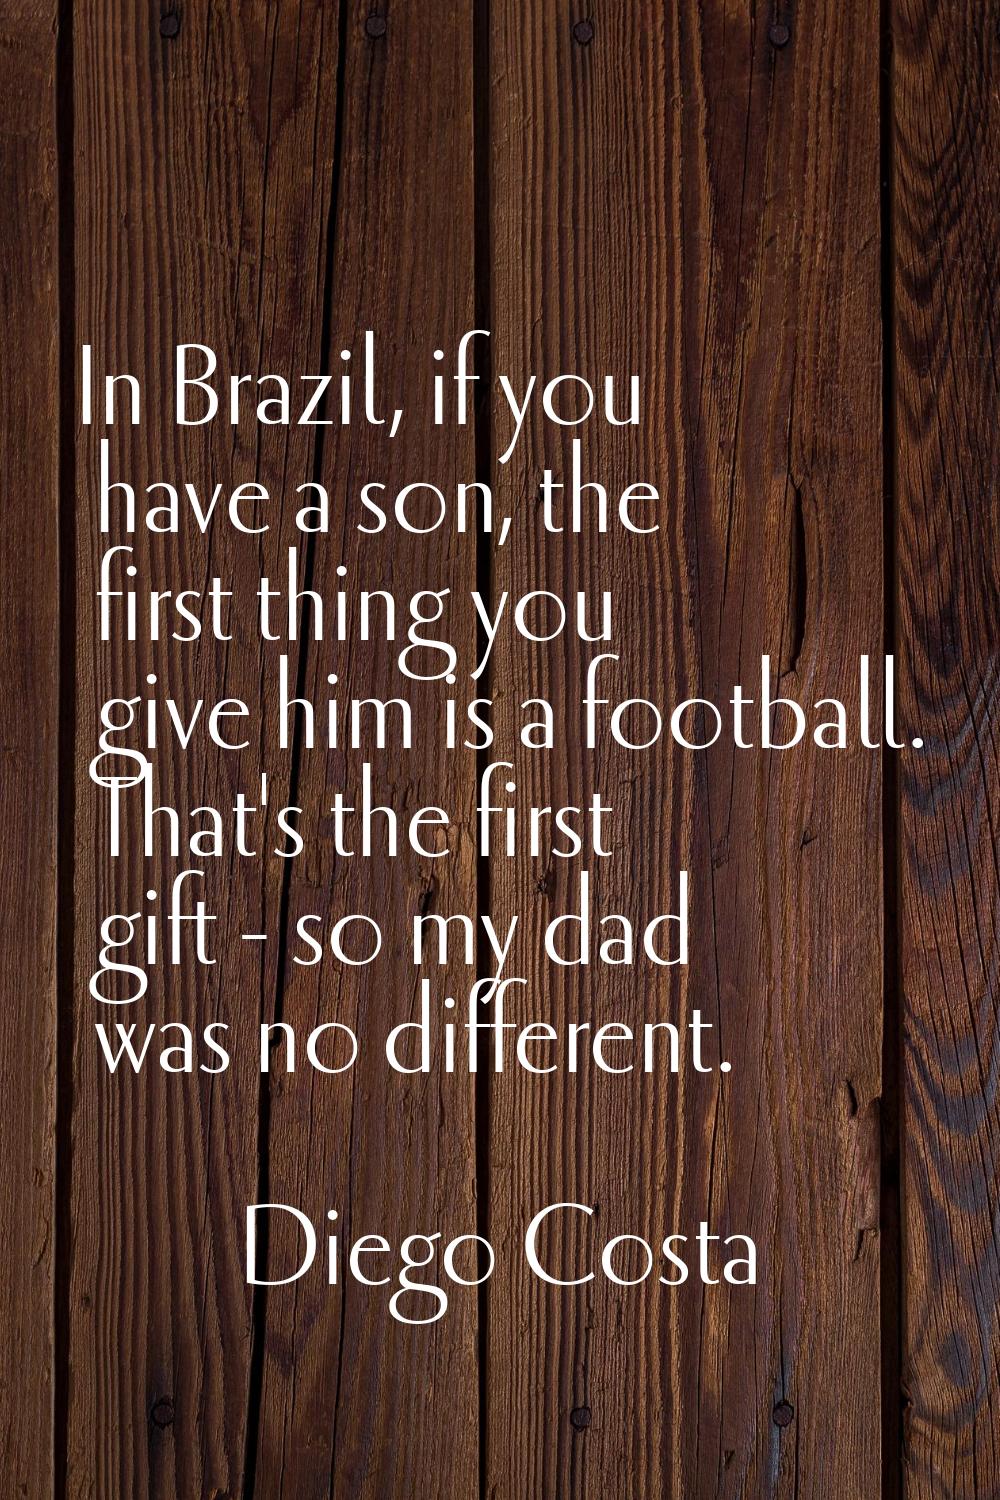 In Brazil, if you have a son, the first thing you give him is a football. That's the first gift - s